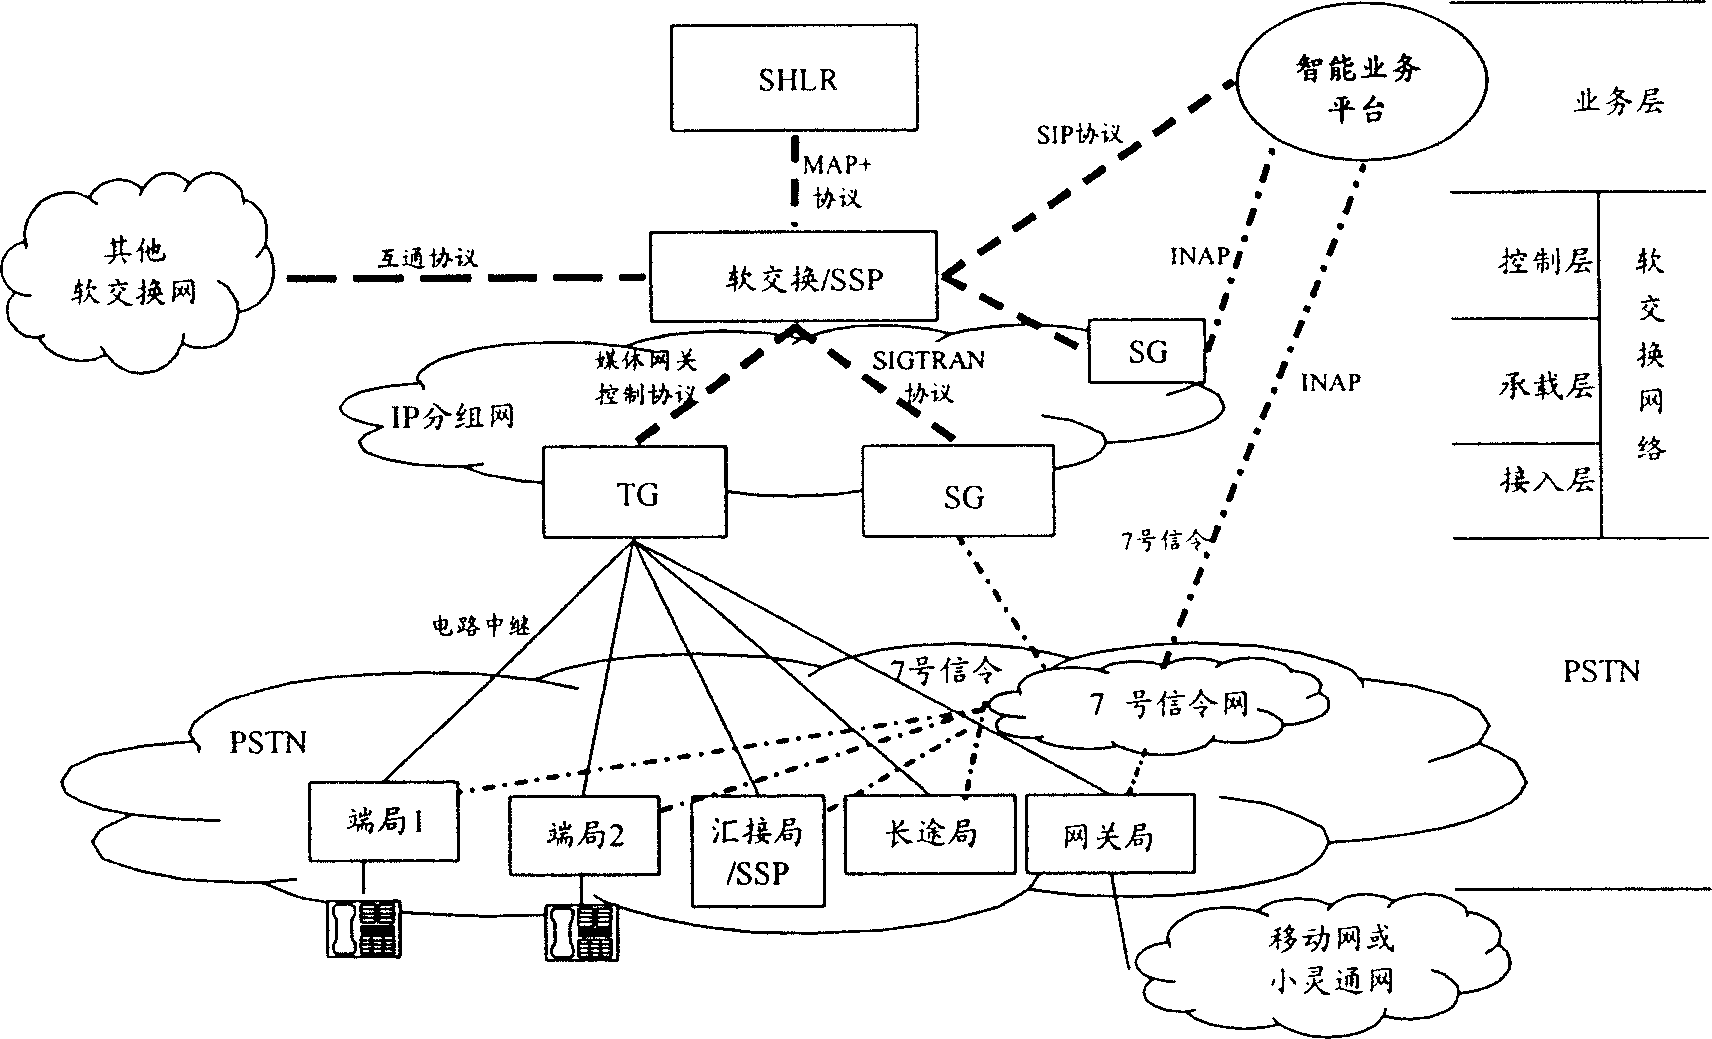 System and method for implementing fixed network searching user integrated data base using soft exchange